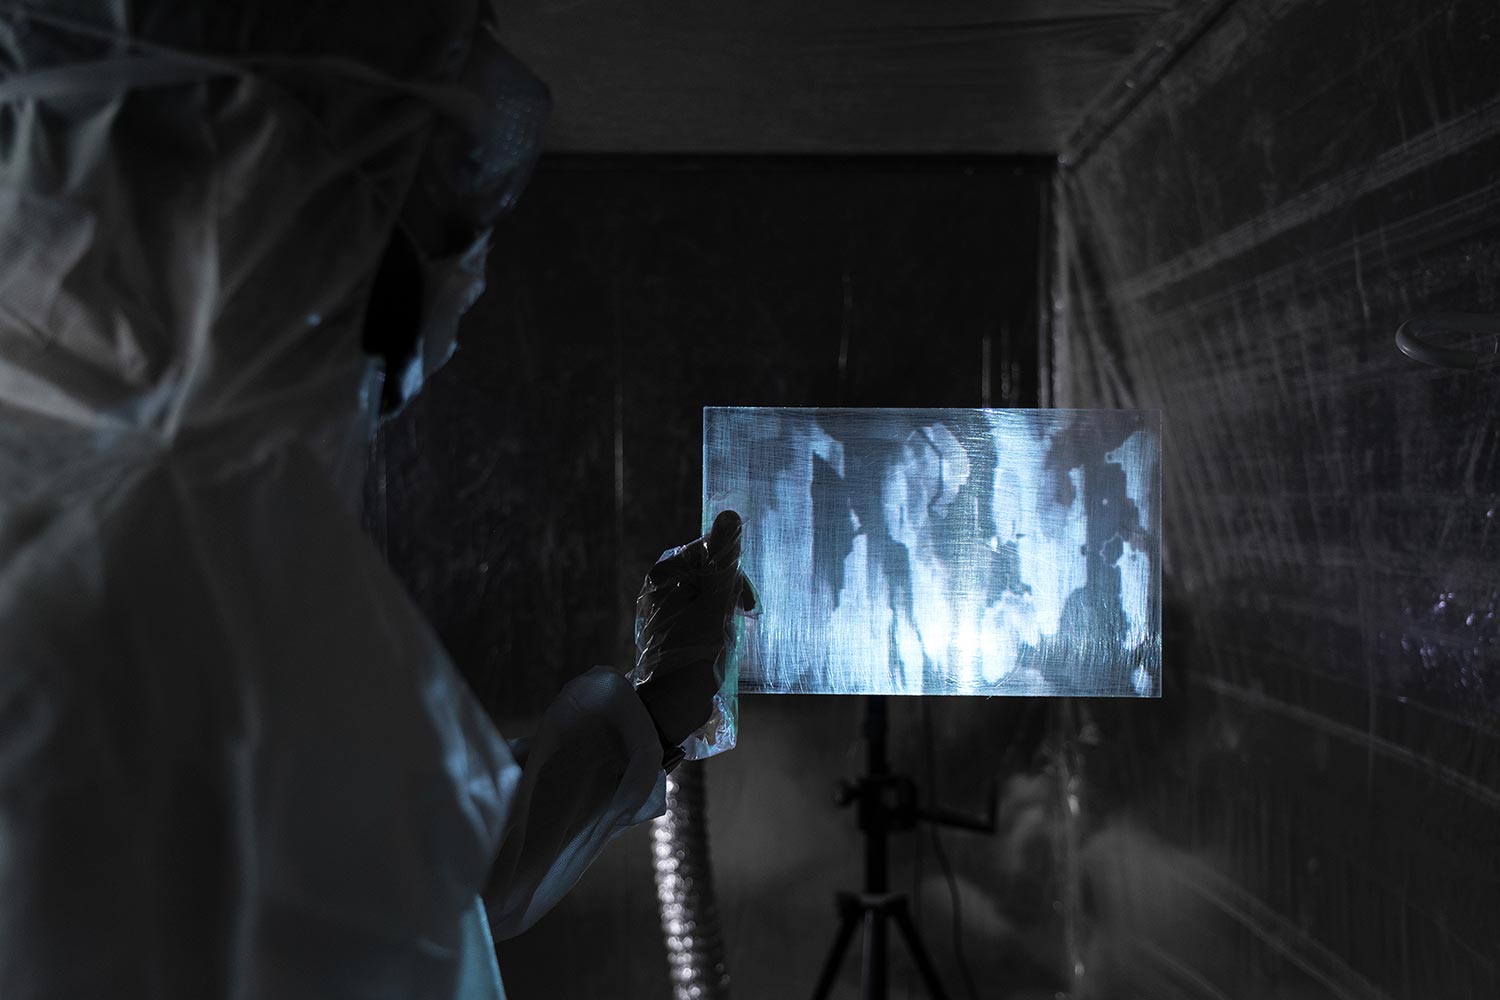 Chiaramentestudio, ‘A visitor, viewing a projection of dust in mid-air on an acrylic plate,’ Rotterdam (2021)